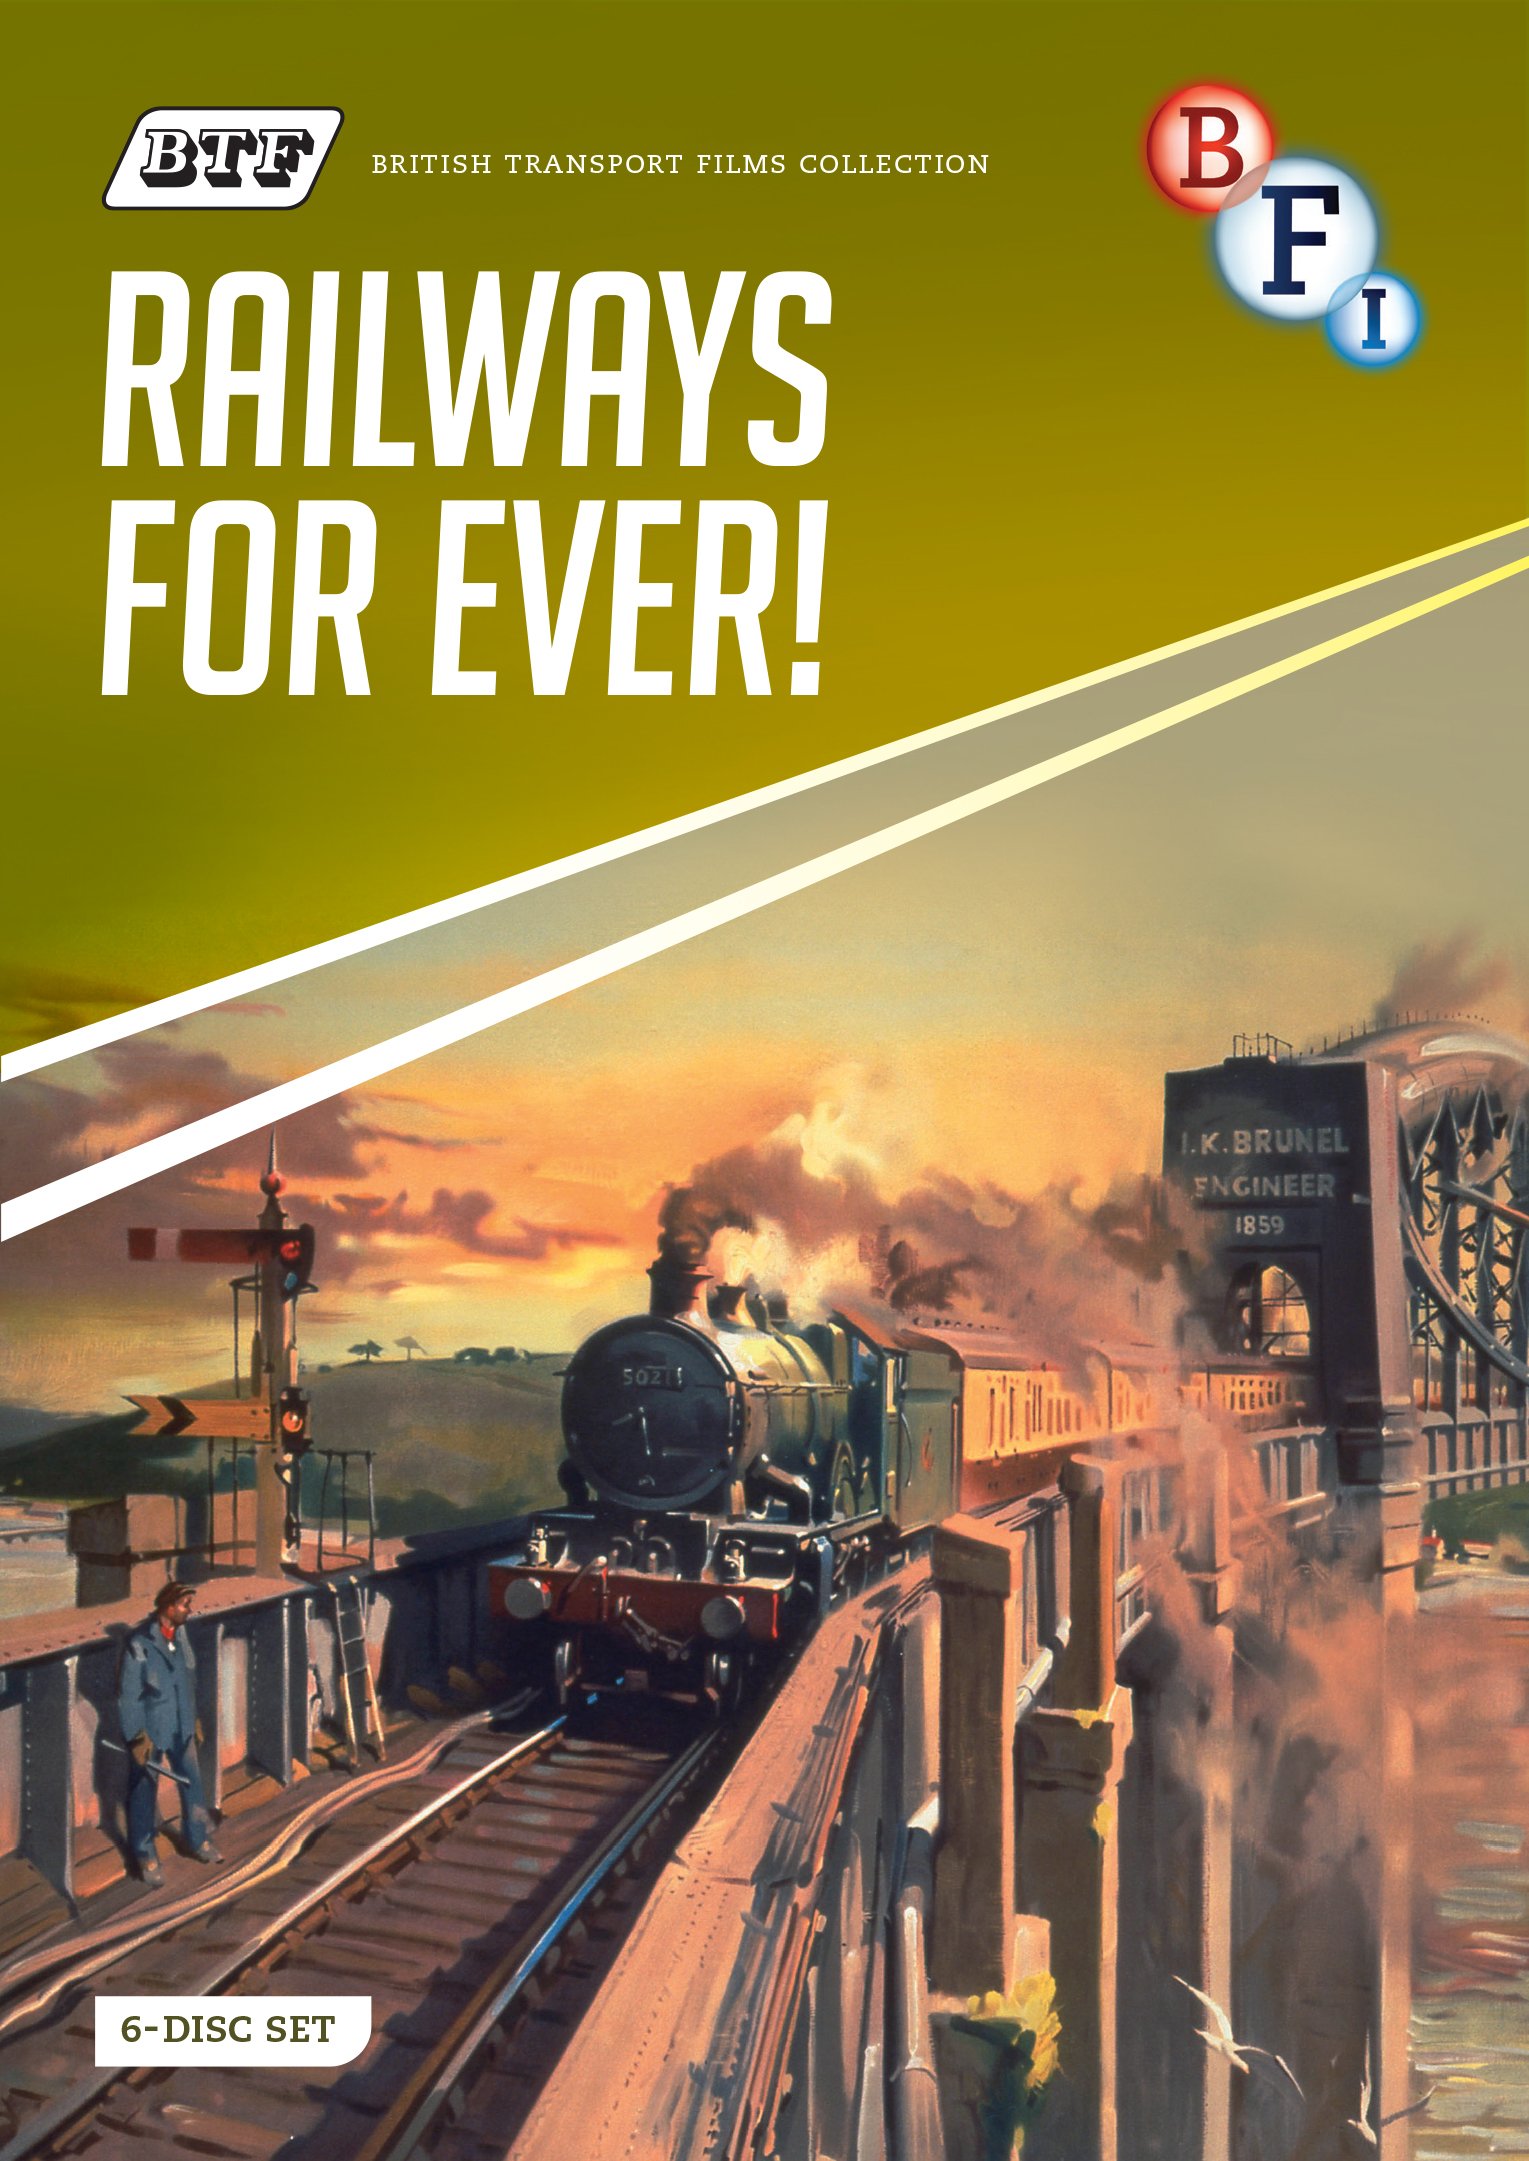 British Transport Films Collection Two: Railways For Ever! [6-Disc DVD Set] [UK Import]